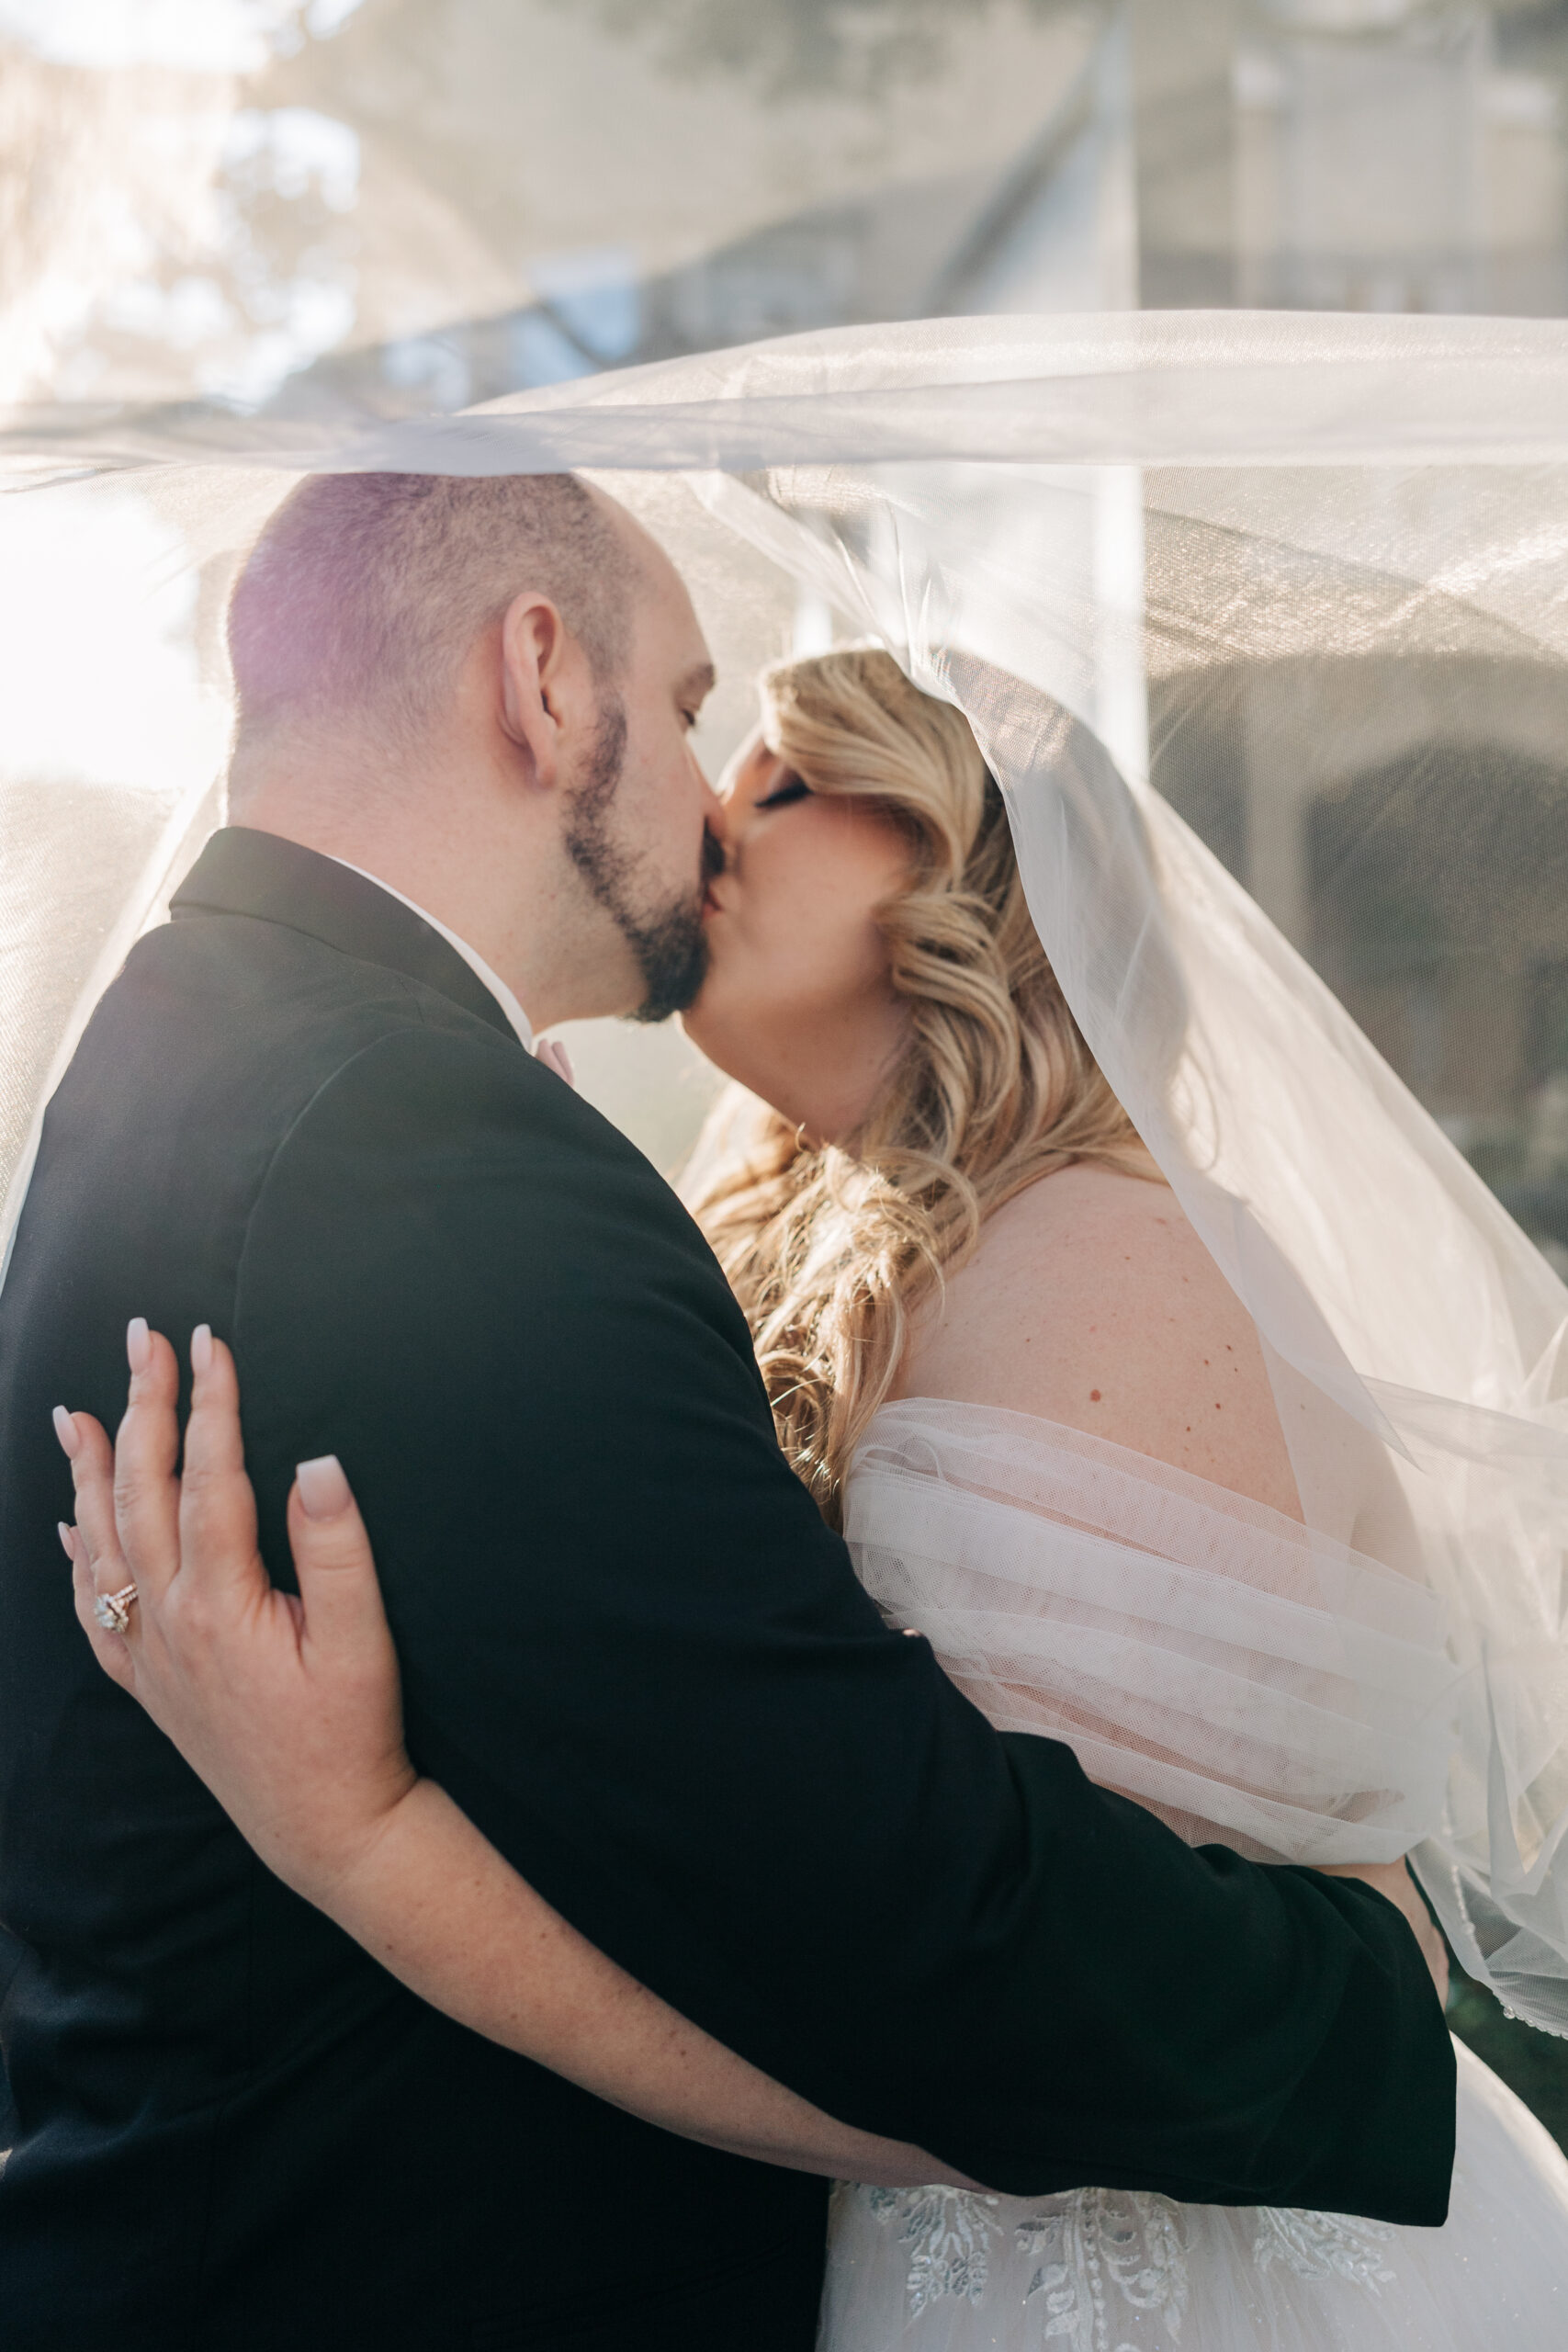 Newlyweds share a kiss while hiding under the veil outside at sunset